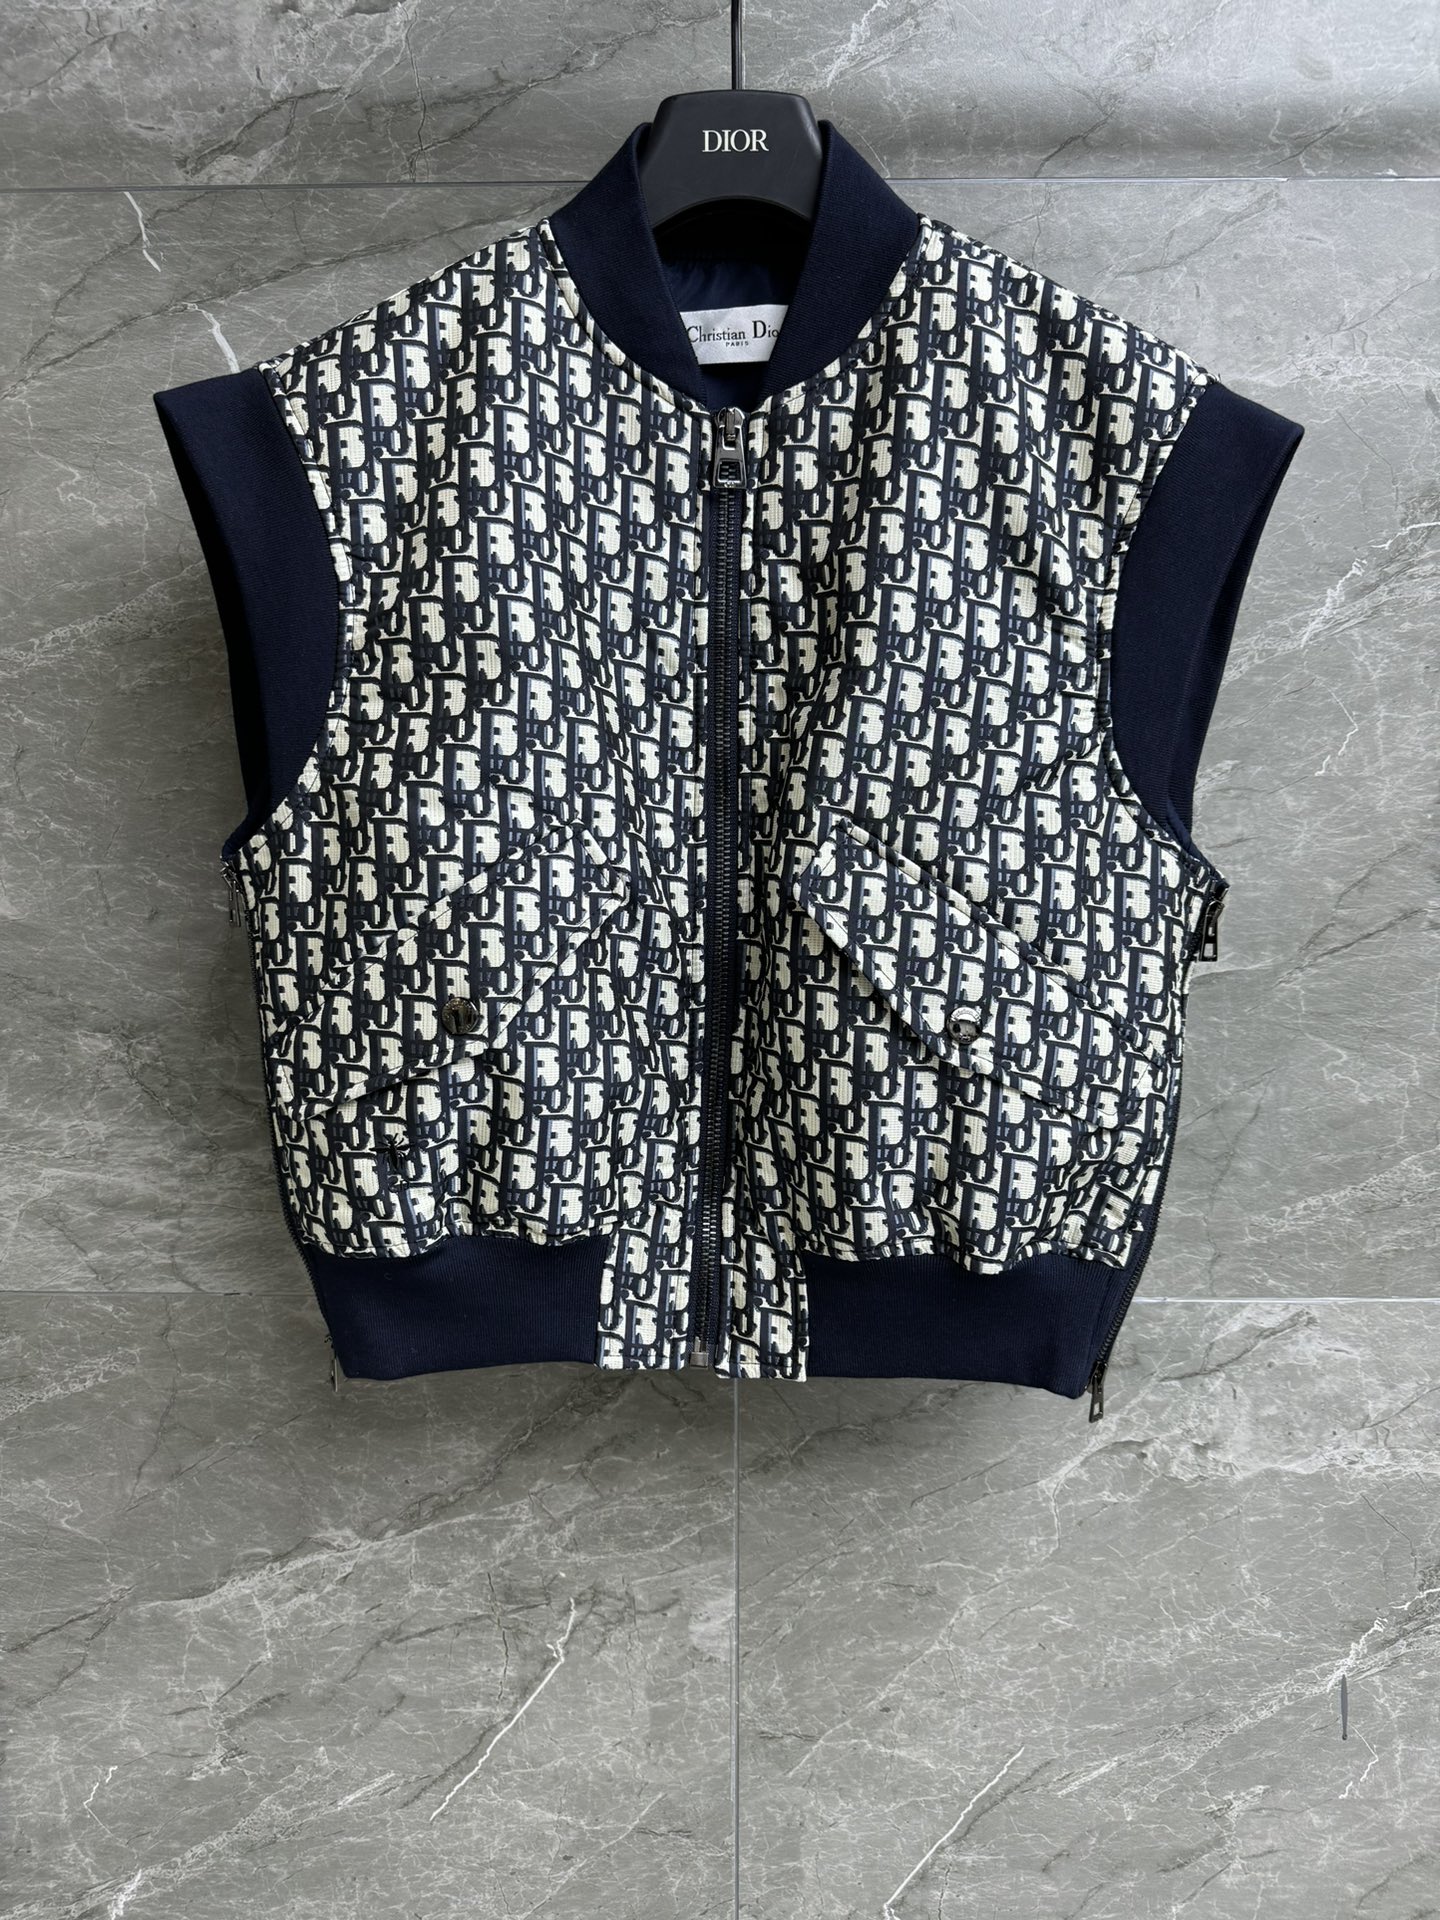 Dior Clothing Waistcoat Cotton Spring Collection Casual